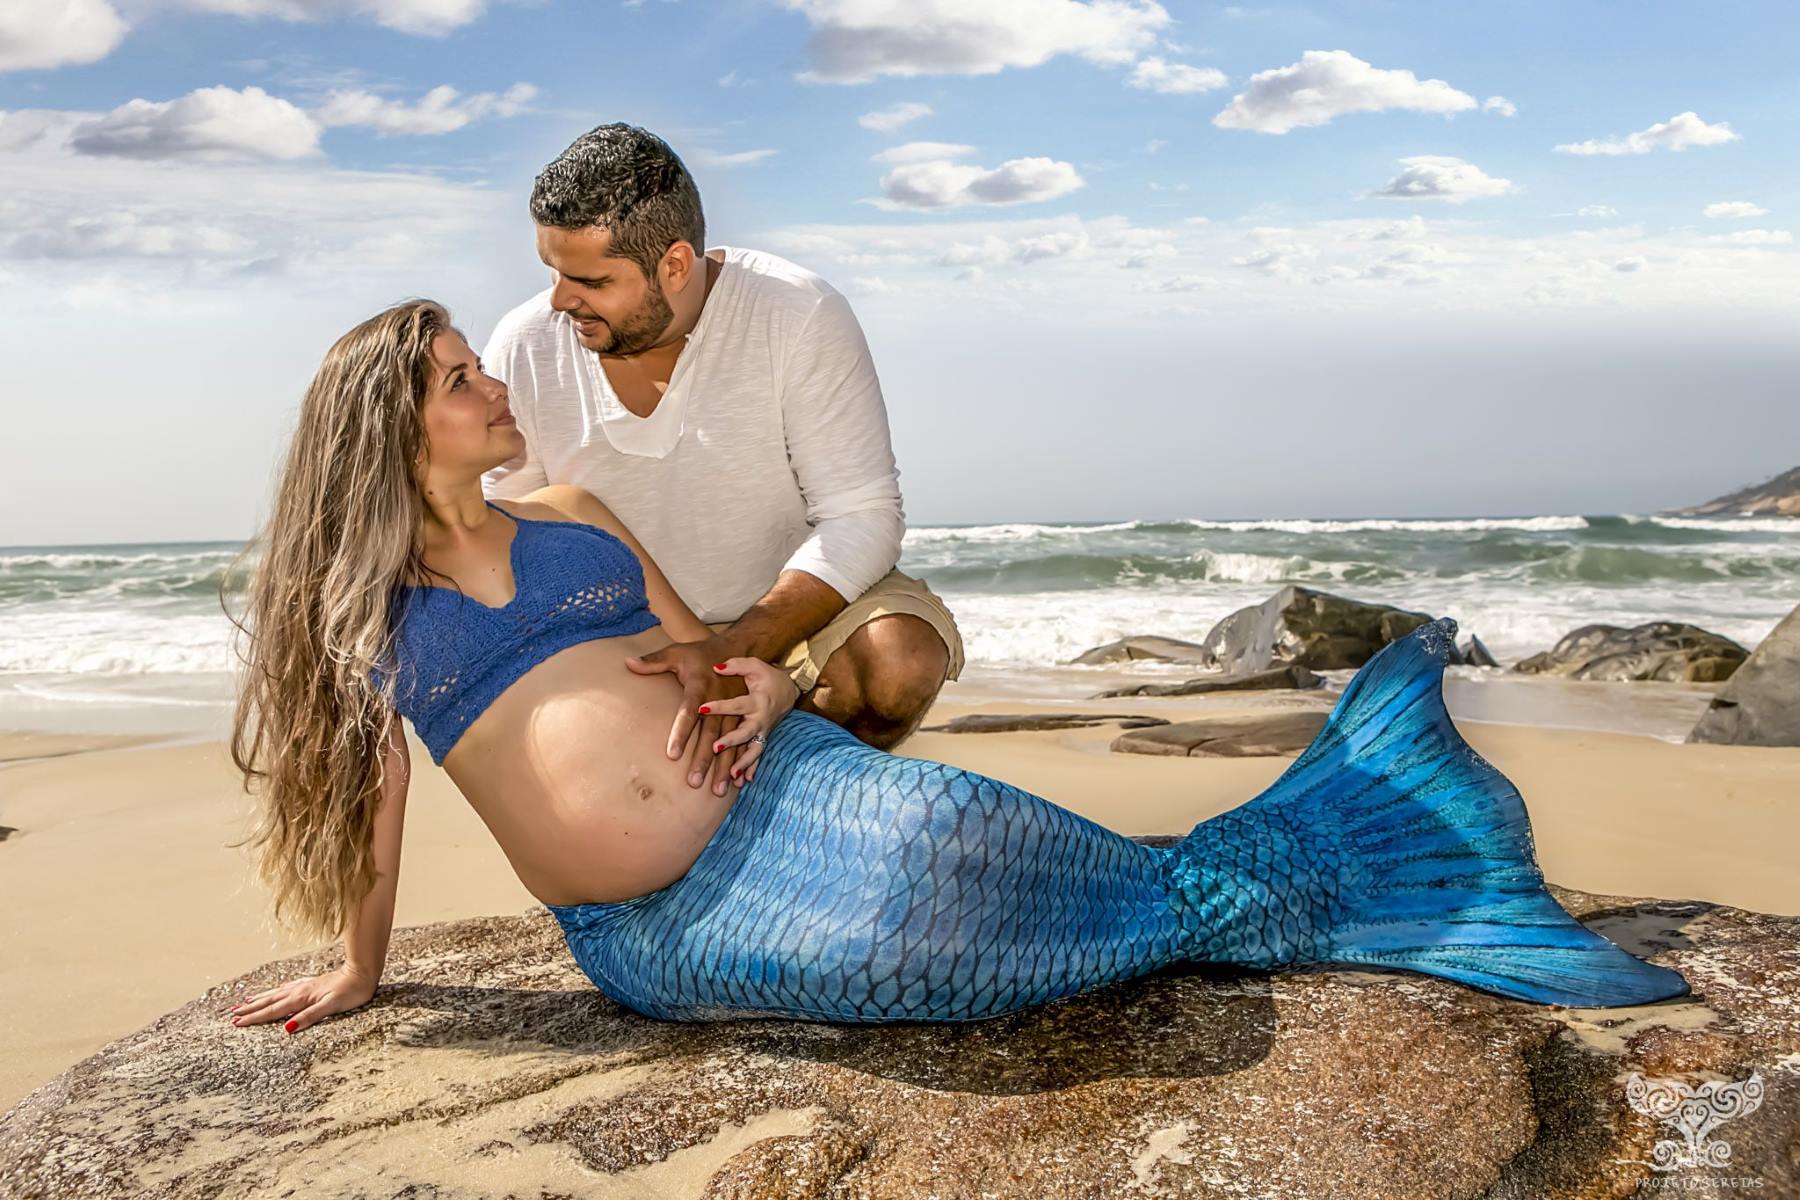 The Surprising Way Mermaids Give Birth With Tails!